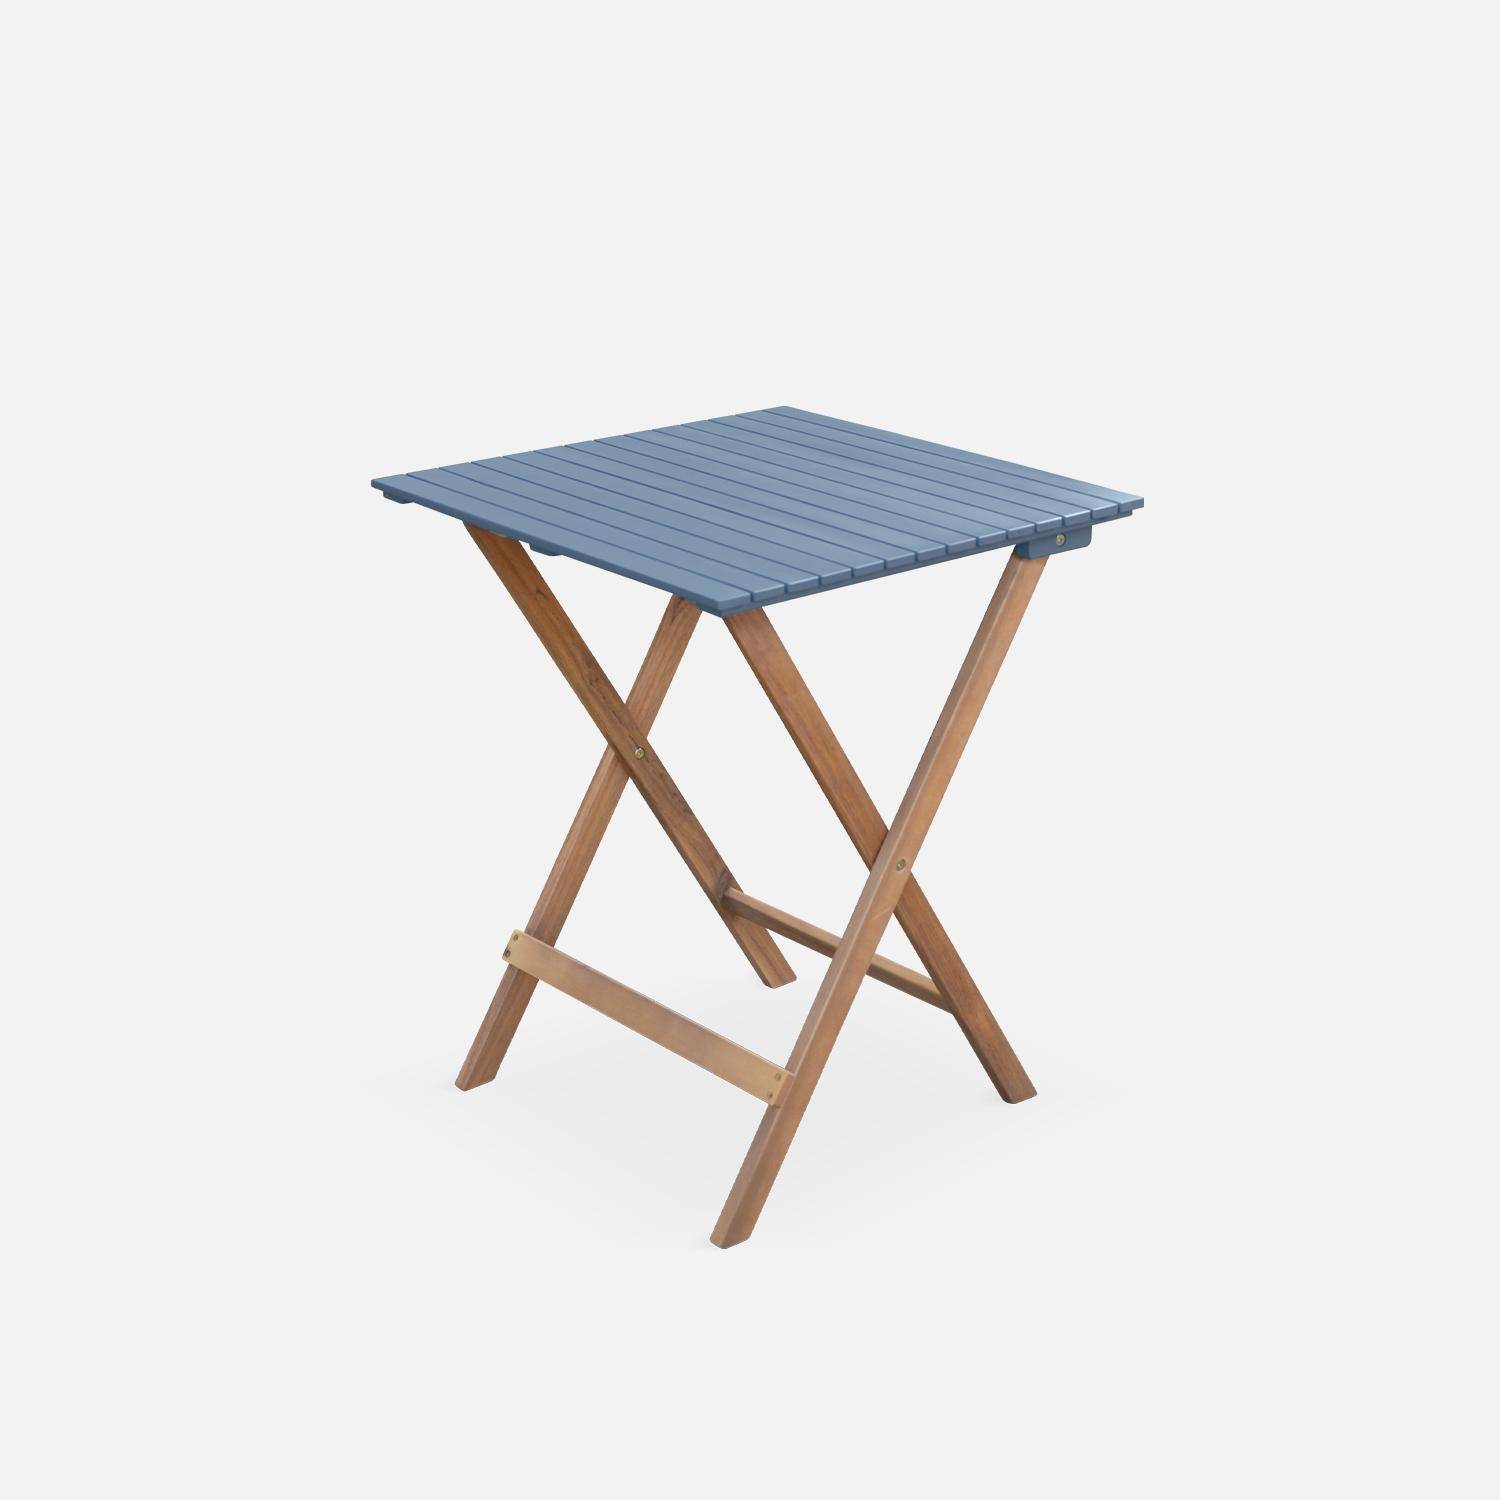 2-seater foldable wooden bistro garden table with chairs, 60x60cm - Barcelona - Grey Blue,sweeek,Photo6